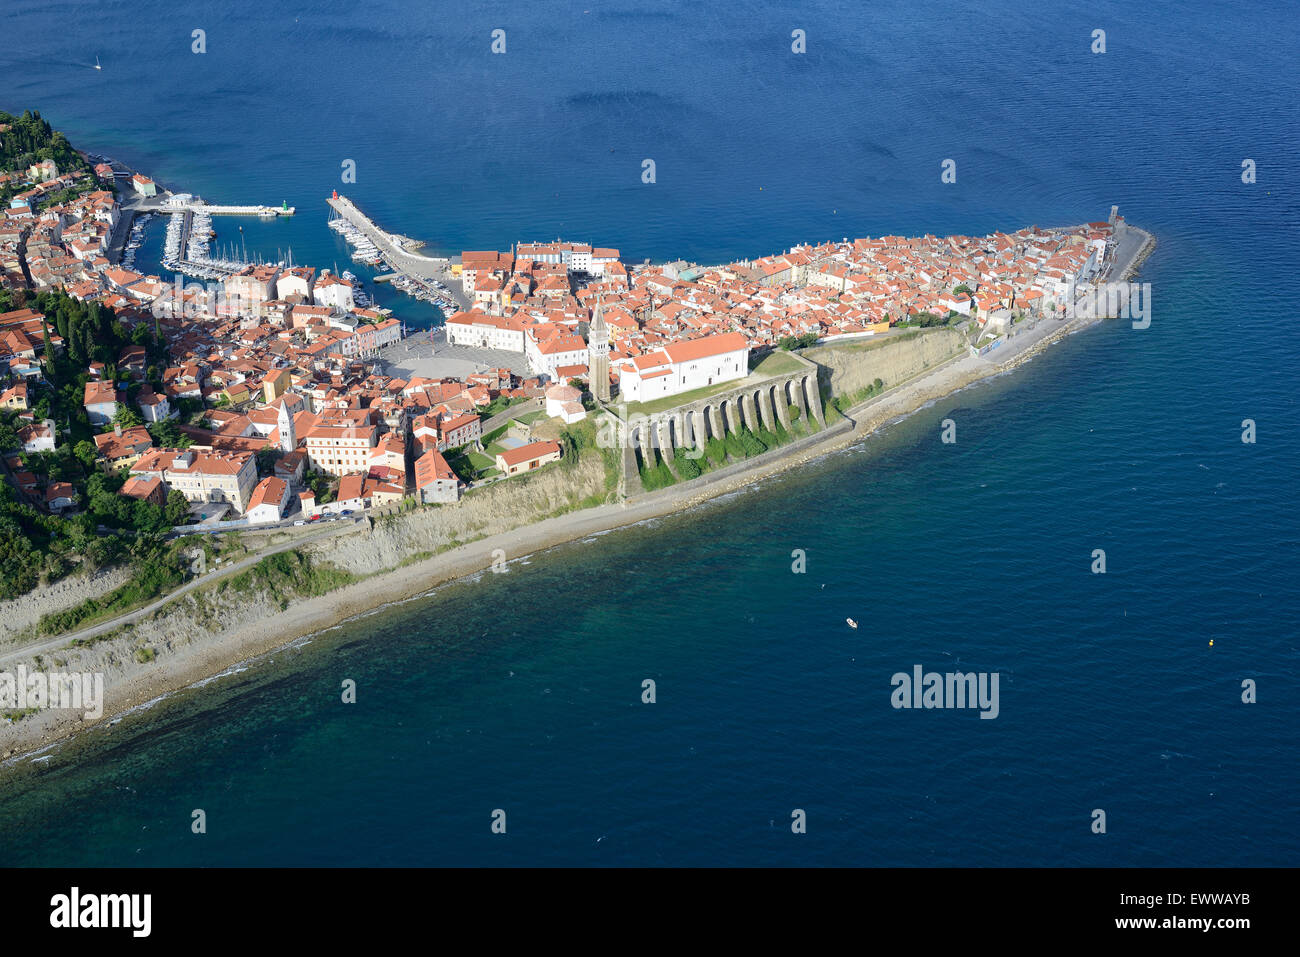 AERIAL VIEW. Medieval city jutting out into the Adriatic Sea. City of Piran (also known as Pirano, its Italian name), Slovenia. Stock Photo